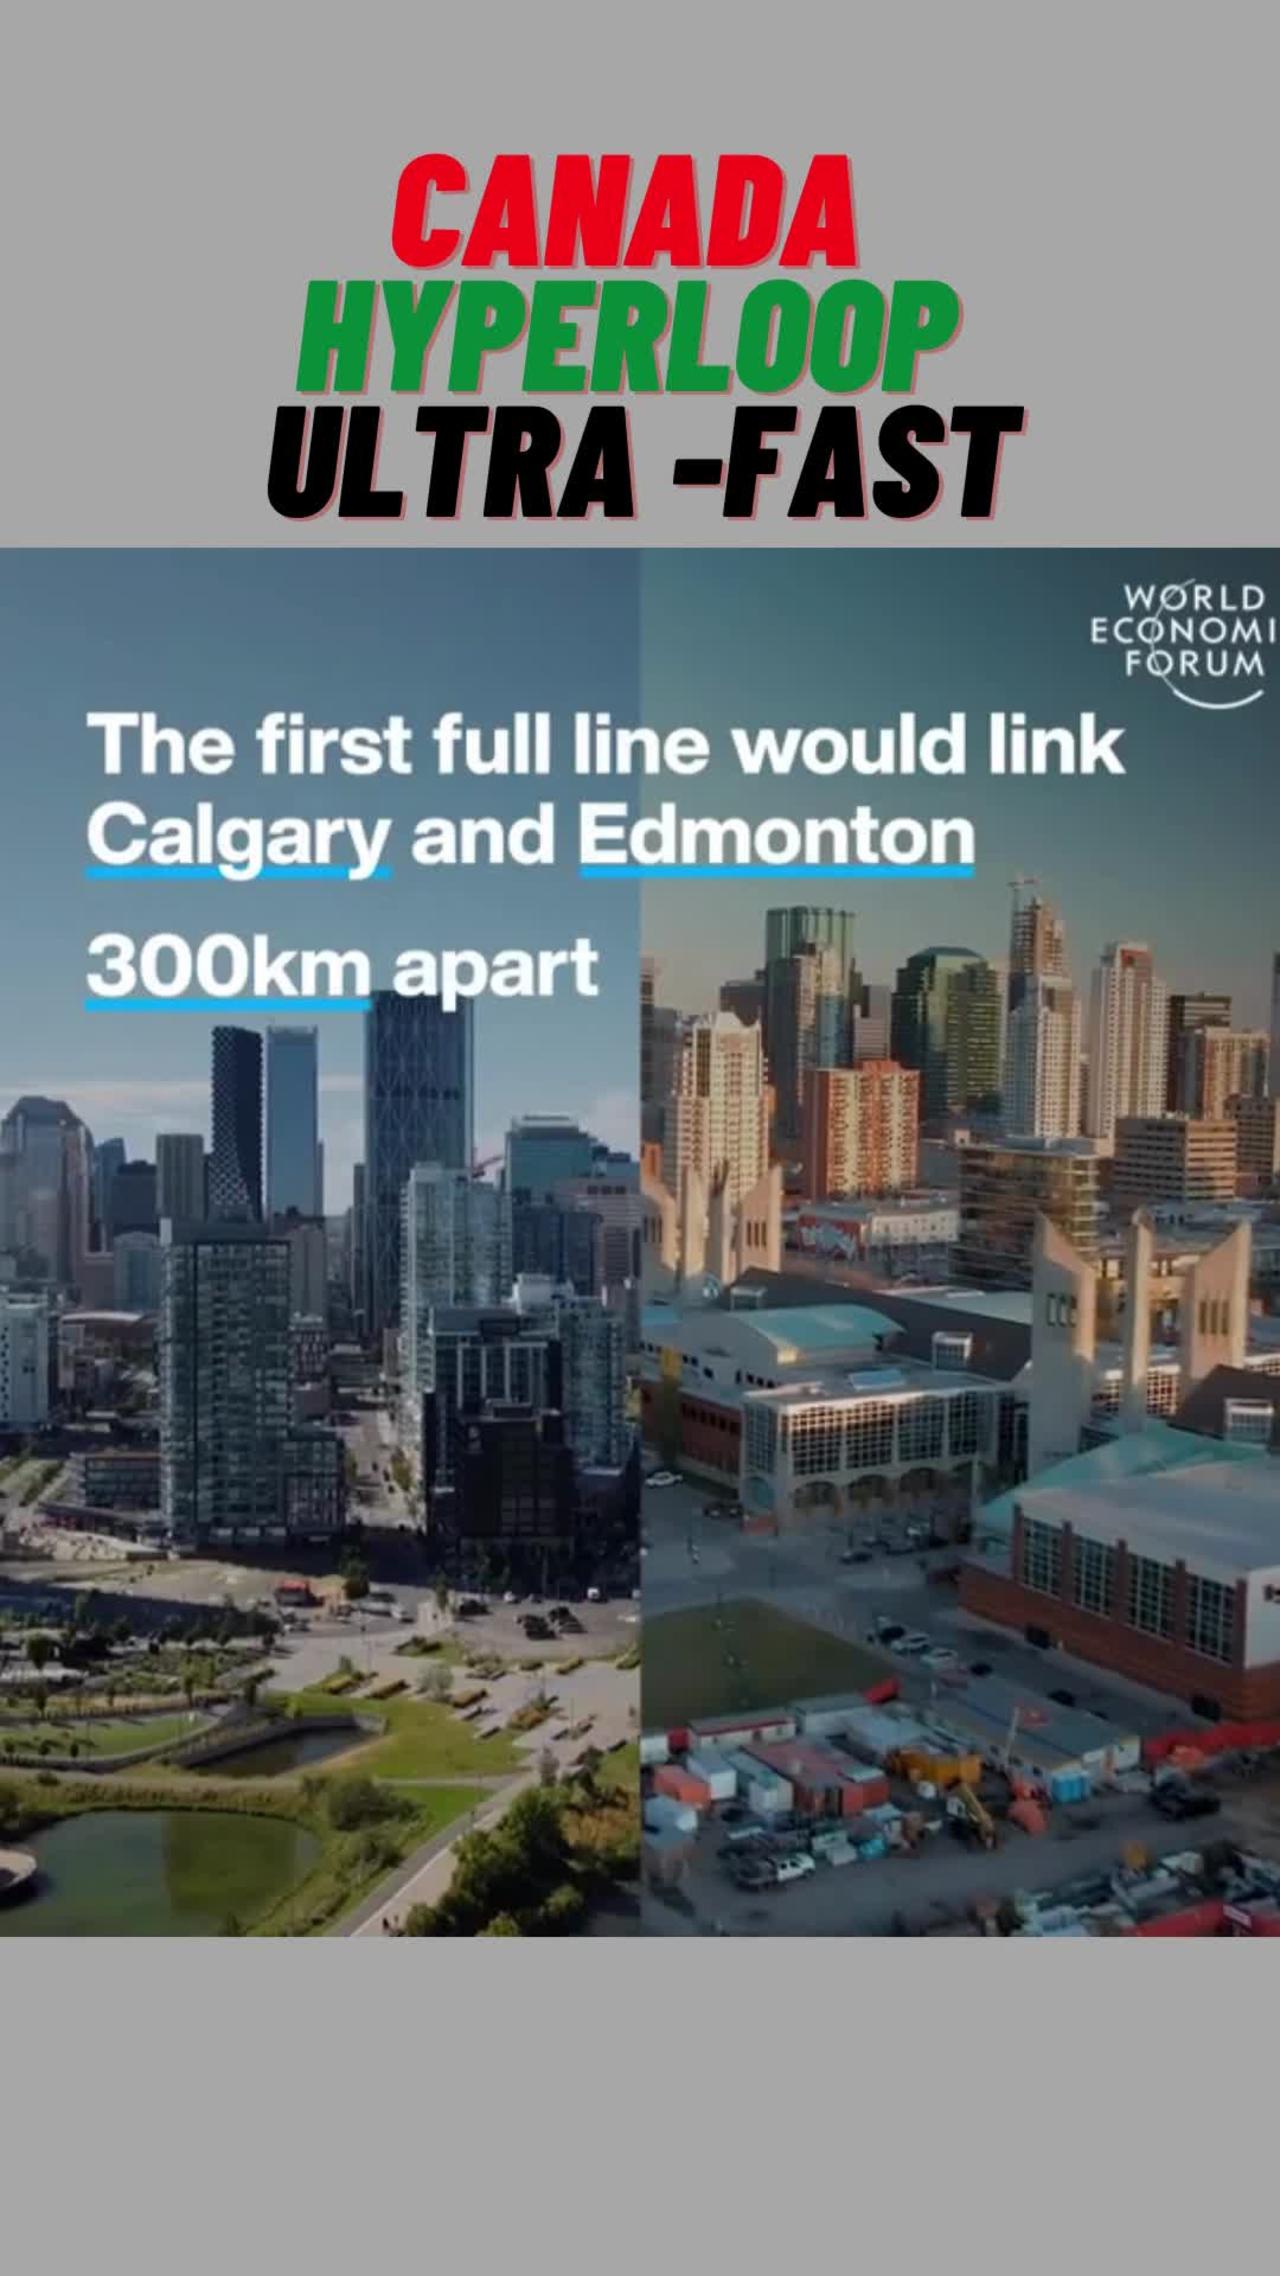 Canada electric ultra-fast hyperloop train.Faster than plane, save 636,000 tonnes CO2 emissions year